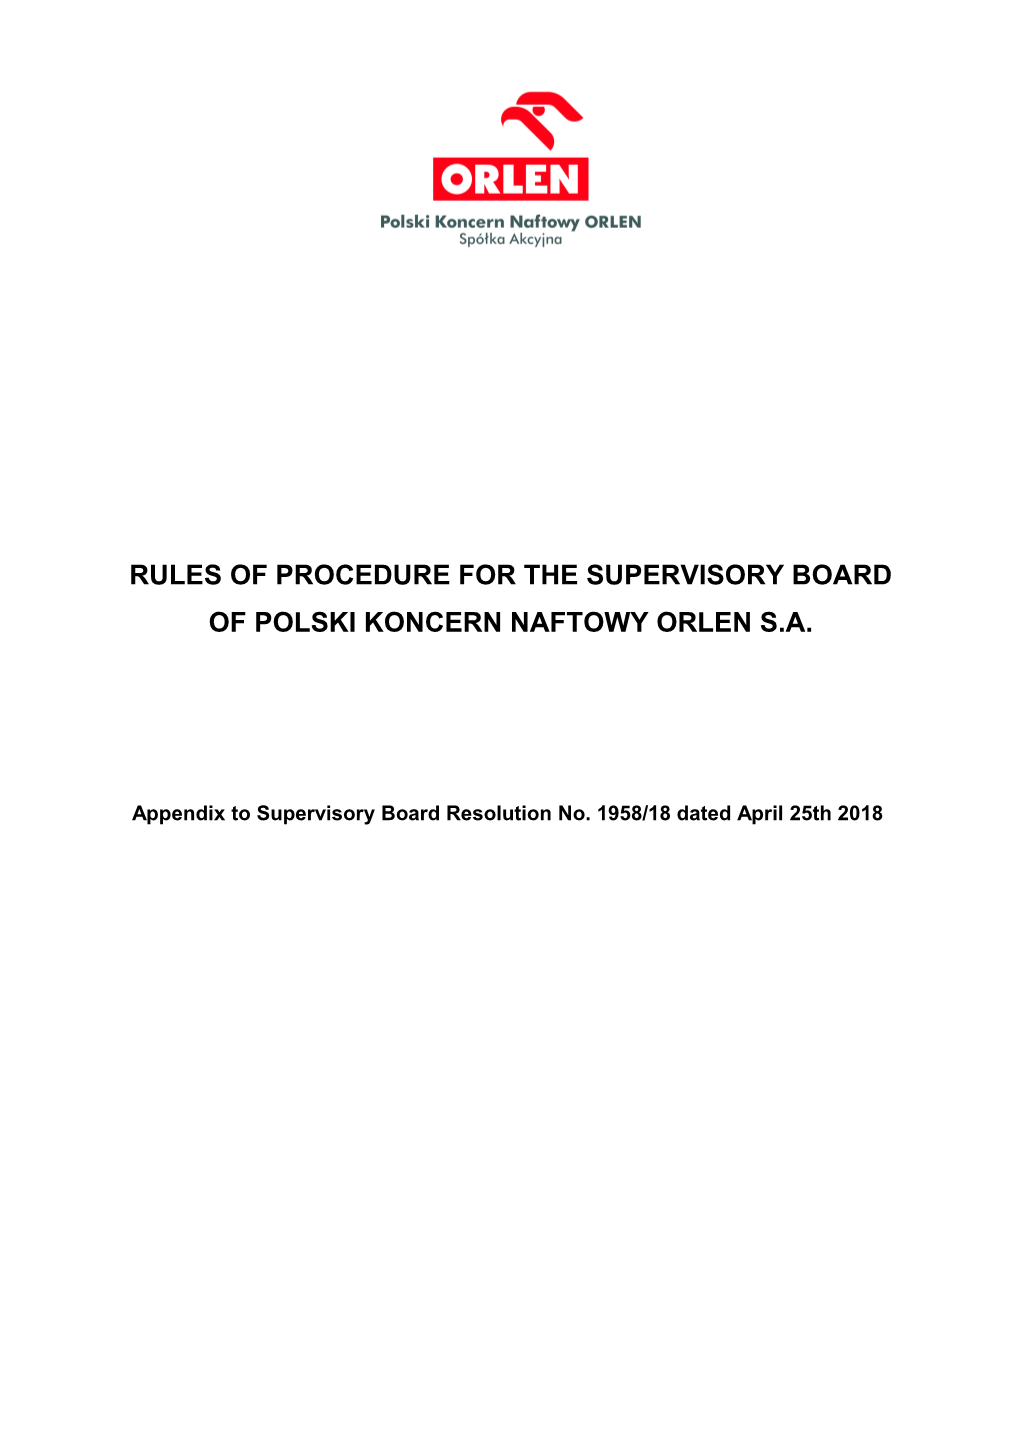 Rules of Procedure for the Supervisory Board of Polski Koncern Naftowy Orlen S.A